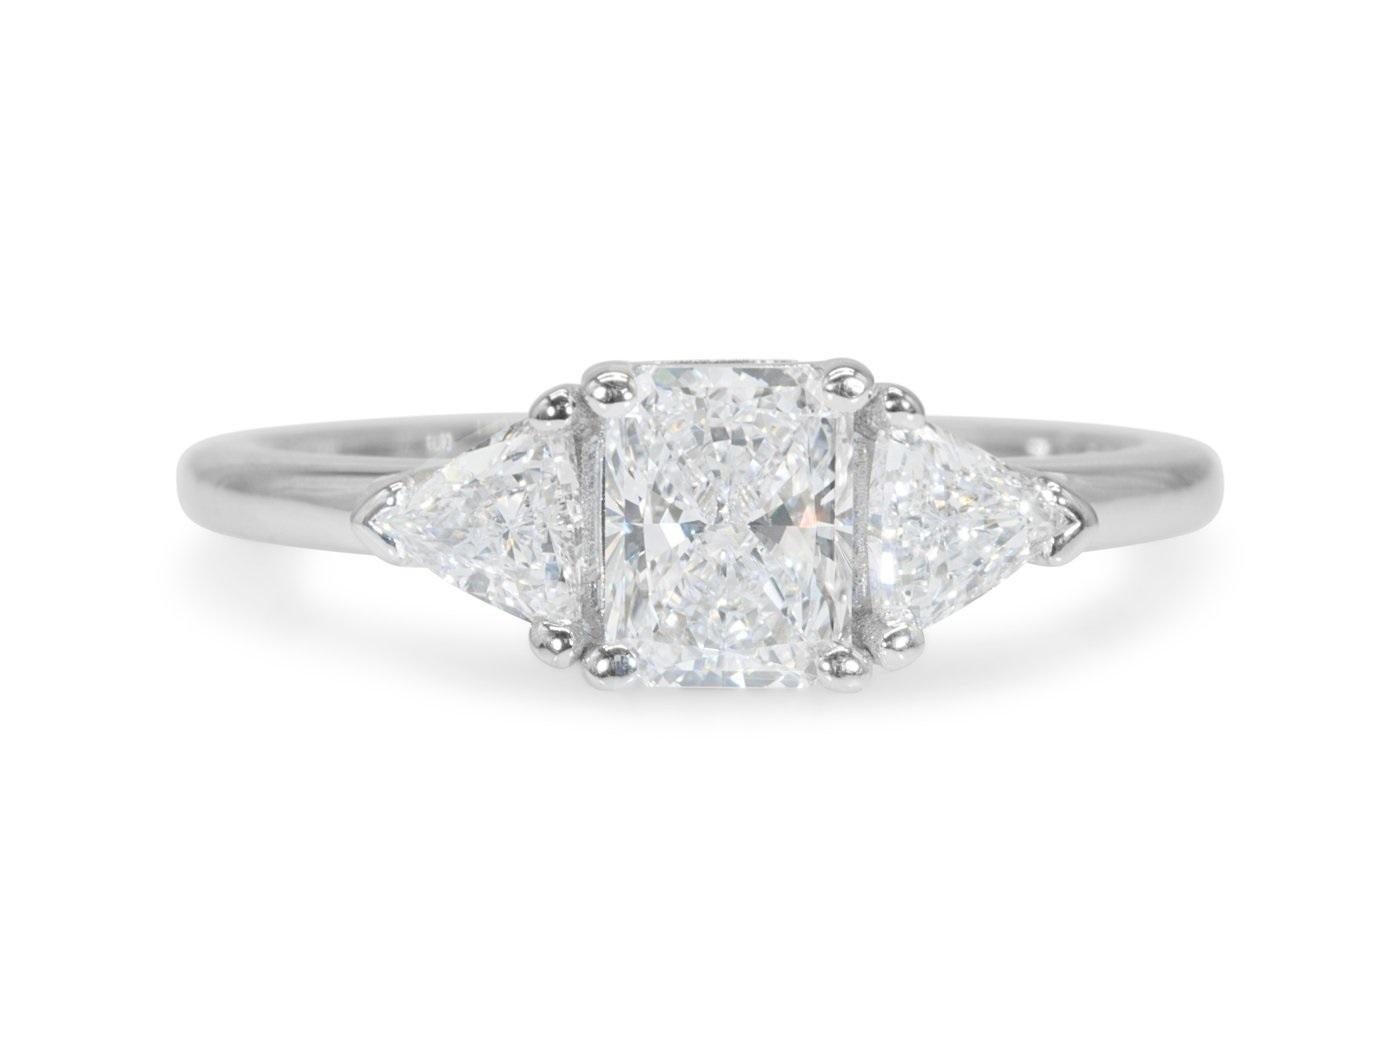 Sparkling 18k White Gold 3 Stone Ring with 0.80 Ct Natural Diamonds GIA Cert For Sale 1